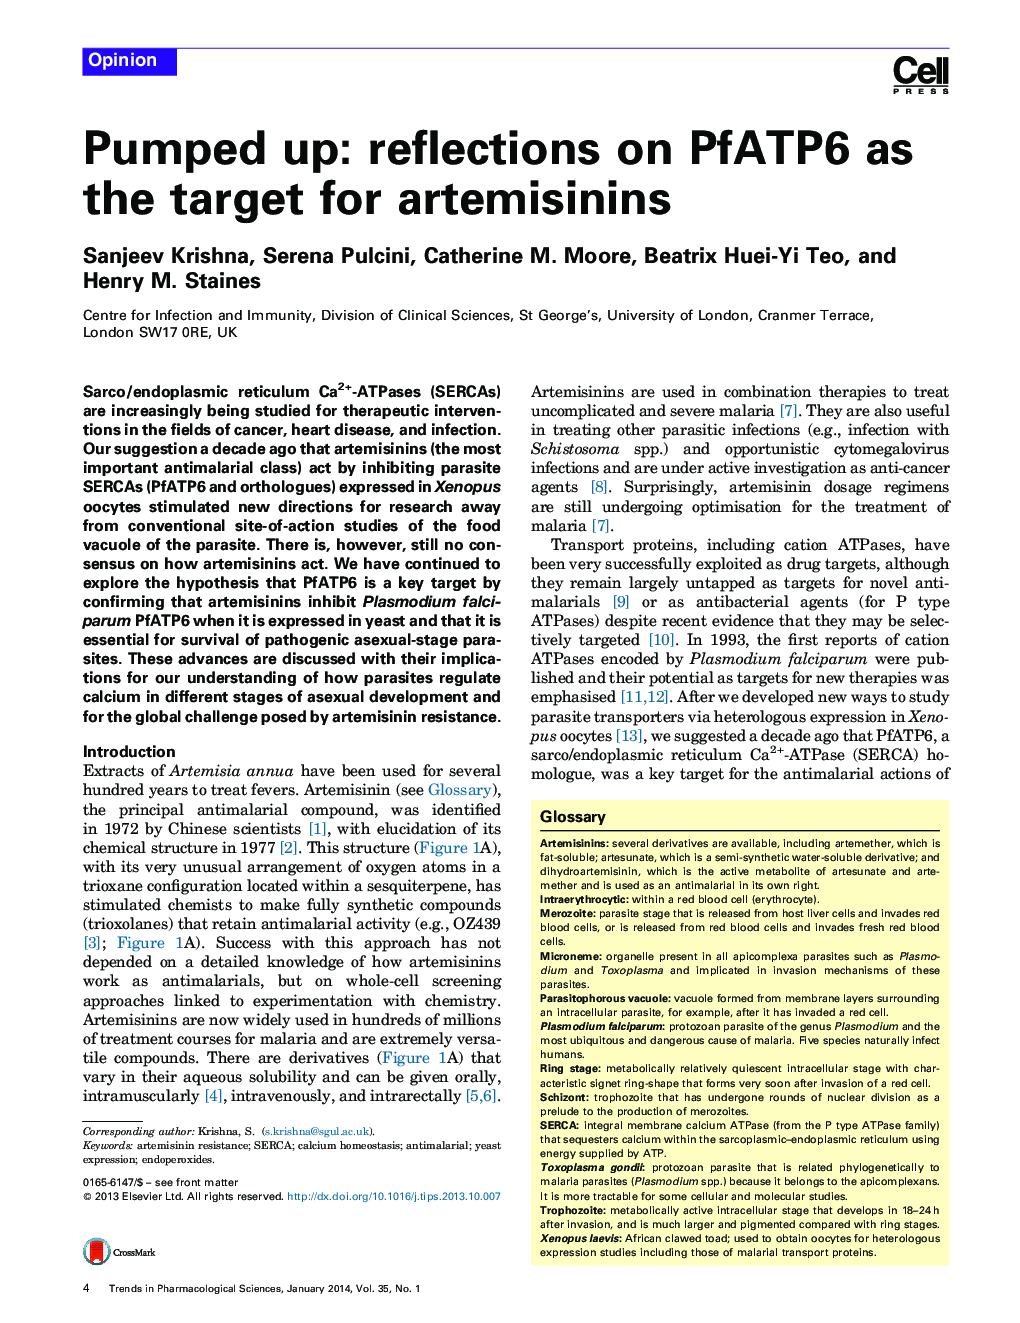 Pumped up: reflections on PfATP6 as the target for artemisinins